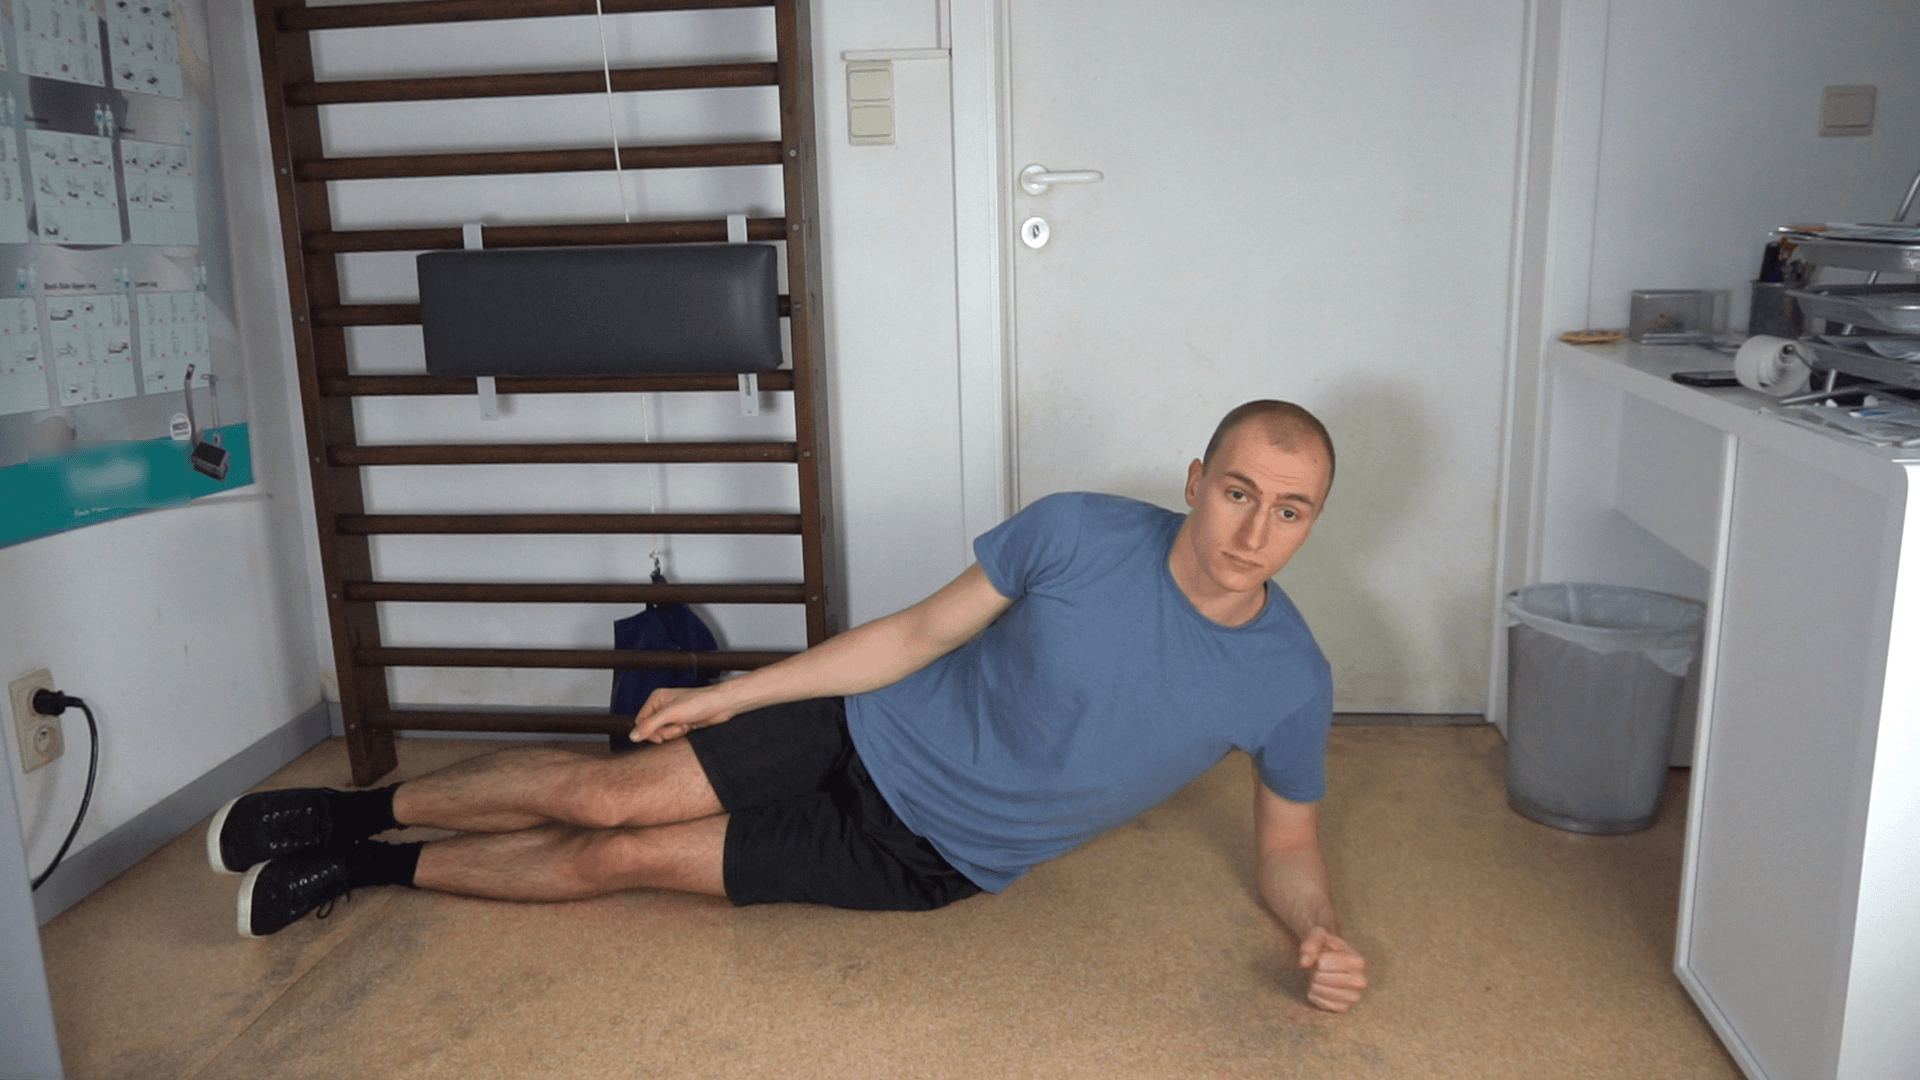 How to do a side plank reach